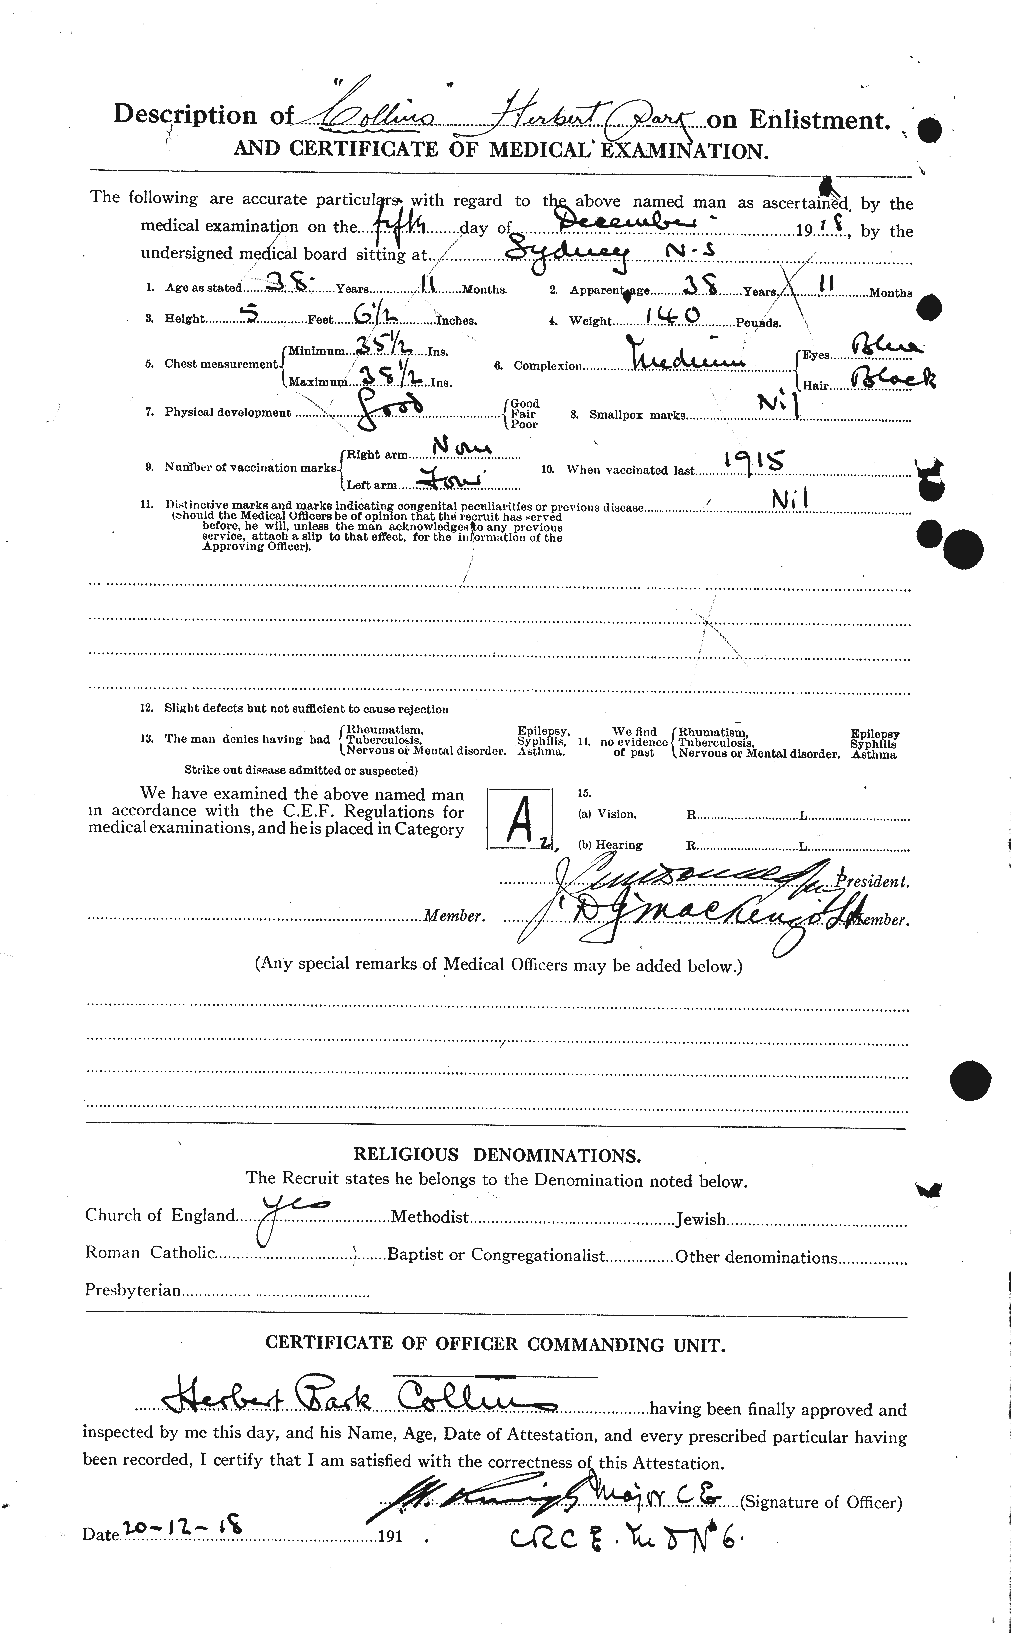 Personnel Records of the First World War - CEF 069999b